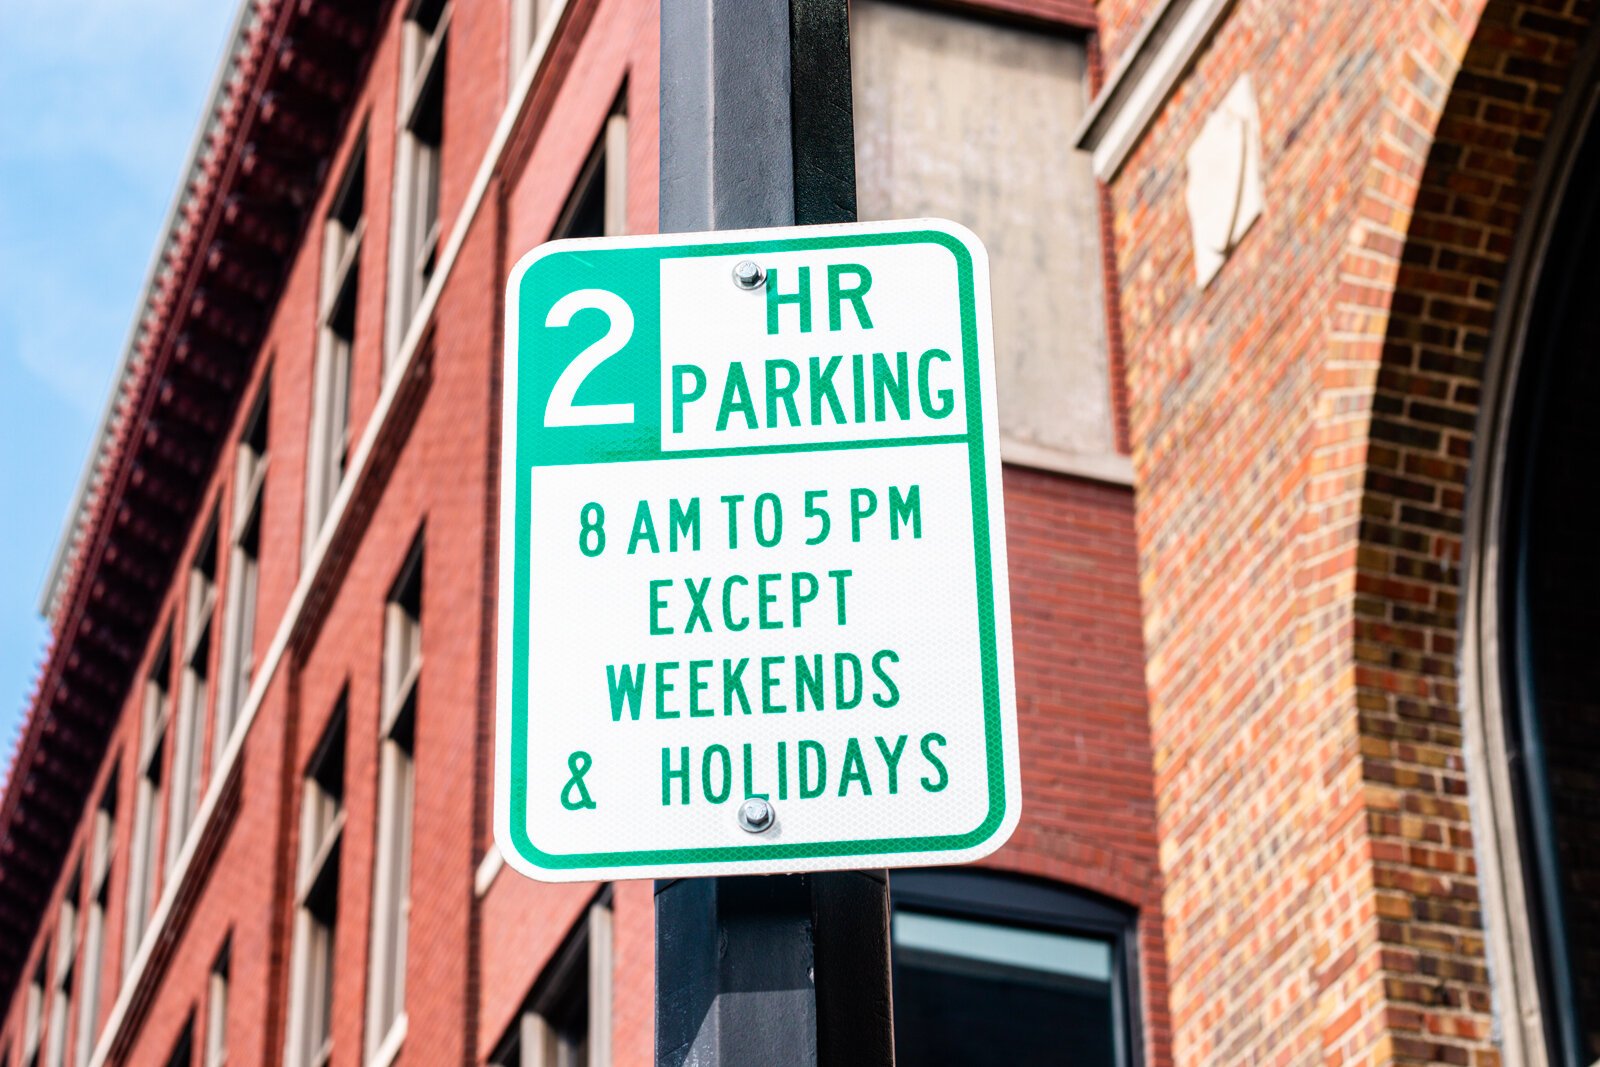 Most meters in Downtown Fort Wayne are time-limited between 15 minutes and two hours to create a constant turnover of cars.